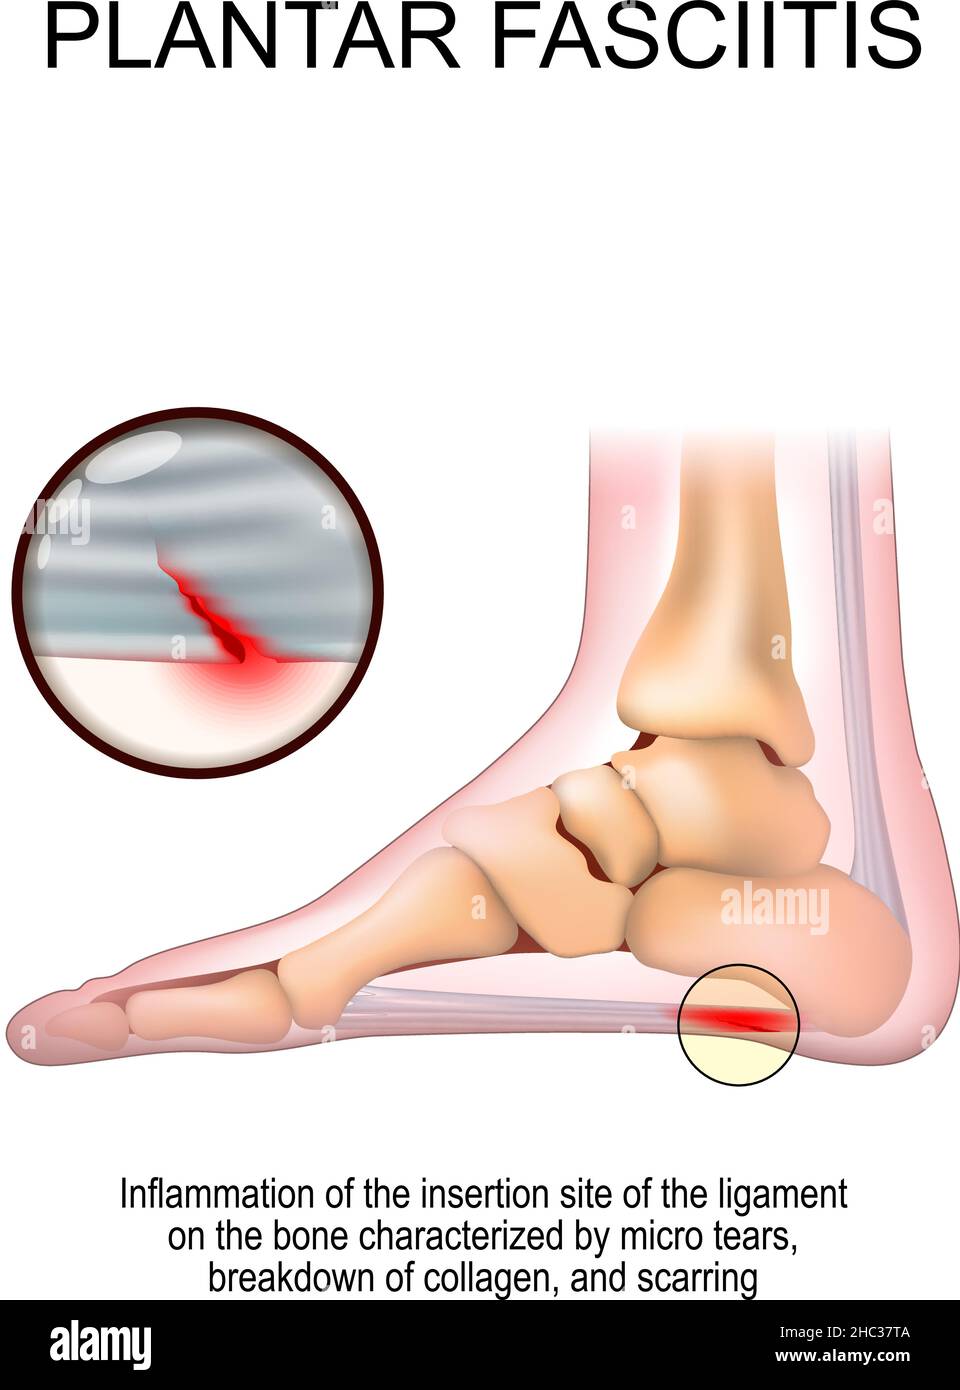 Plantar fasciitis. foot with the symptoms of plantar fasciitis. disorder of the connective tissue which supports the arch of the foot. Stock Vector